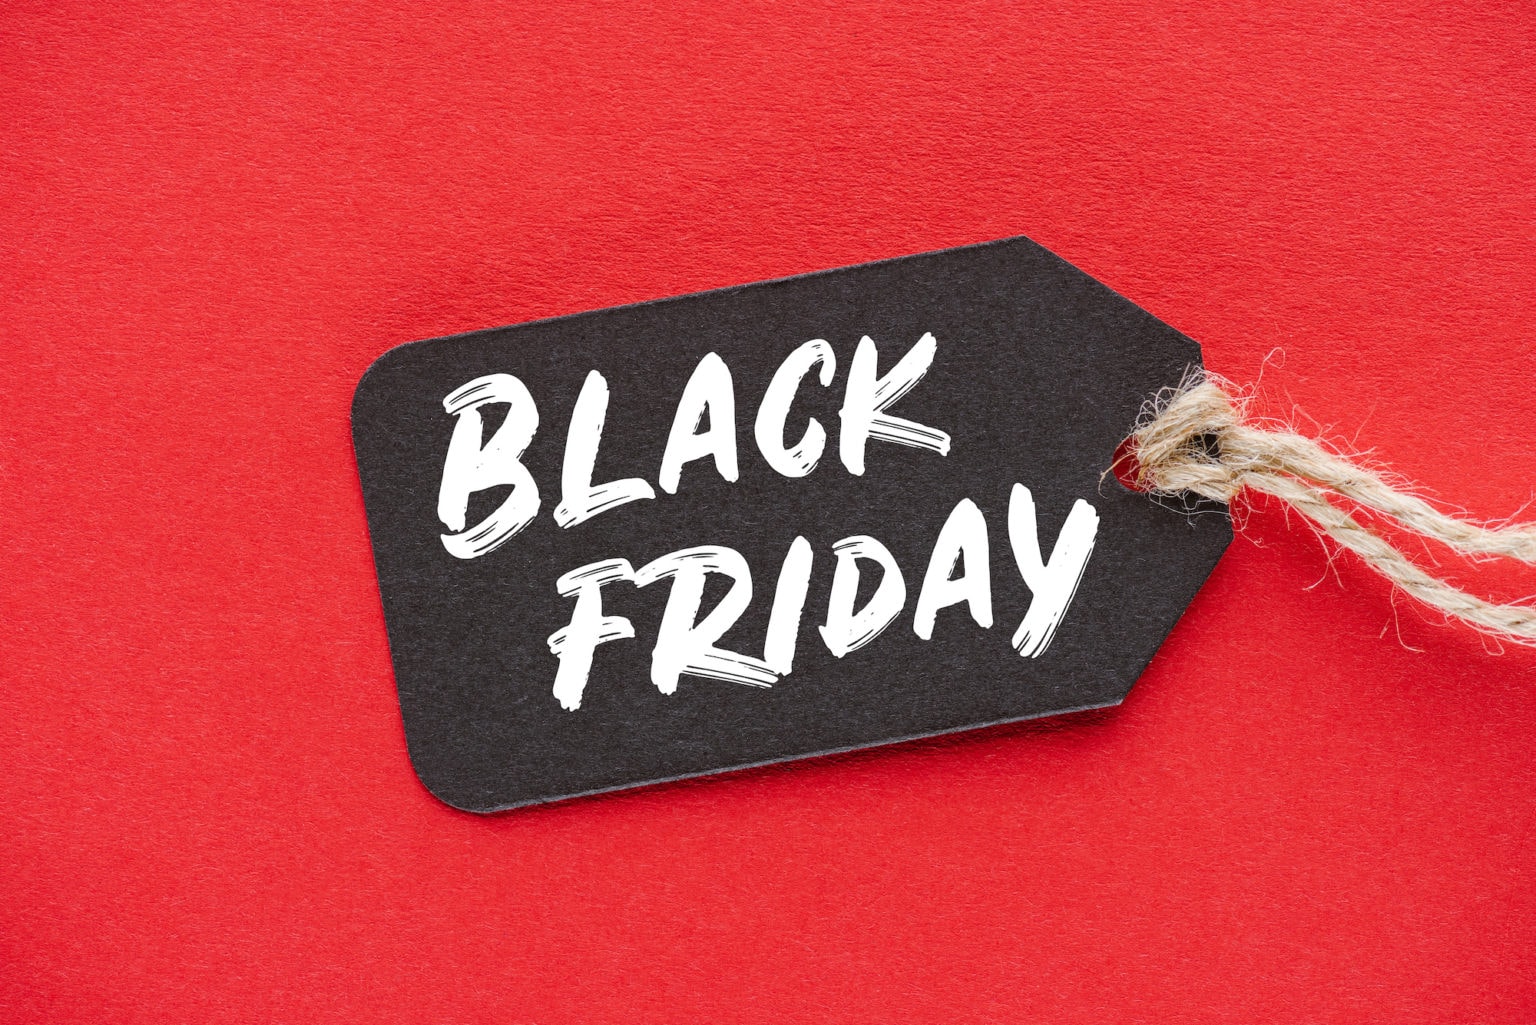 here-are-some-black-friday-deals-you-can-score-while-you-re-in-those